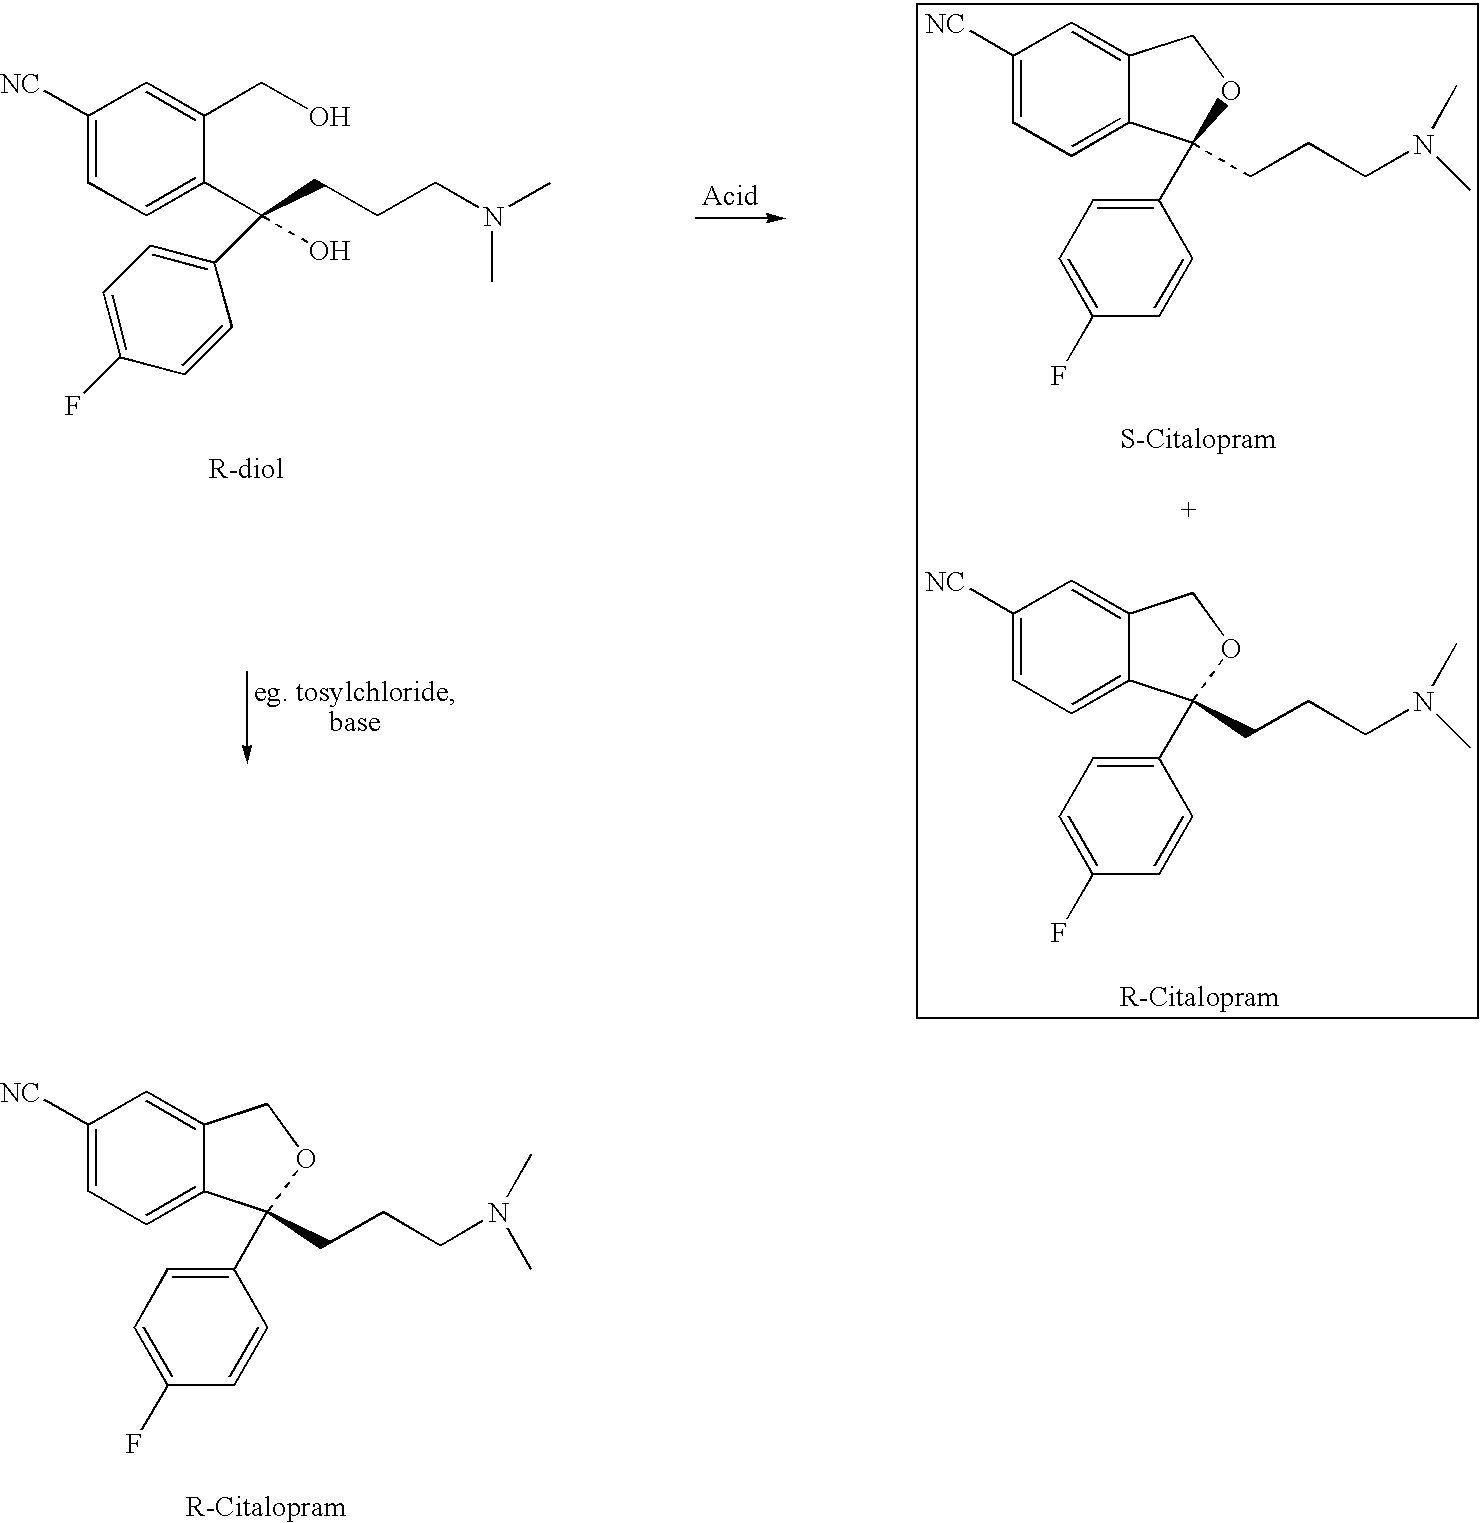 Process for the preparation of racemic citalopram and/or S-or R-citalopram by separation of a mixture of R-and S-citalopram